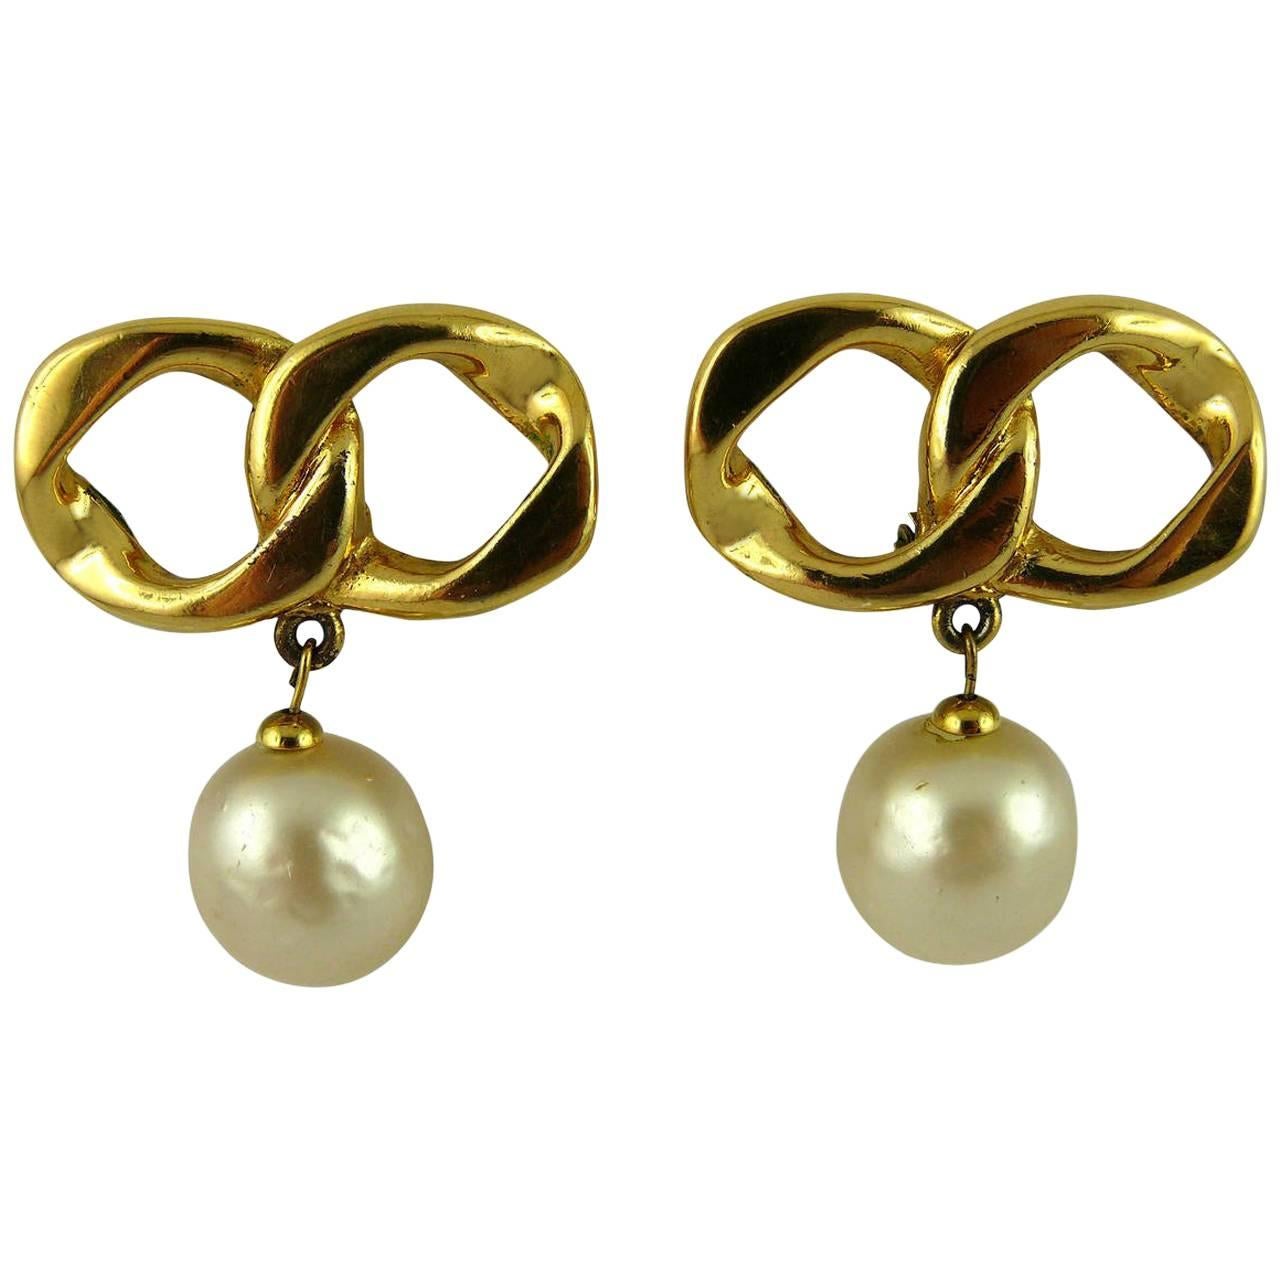 Chanel Vintage Iconic Chain & Pearl Dangling Earrings